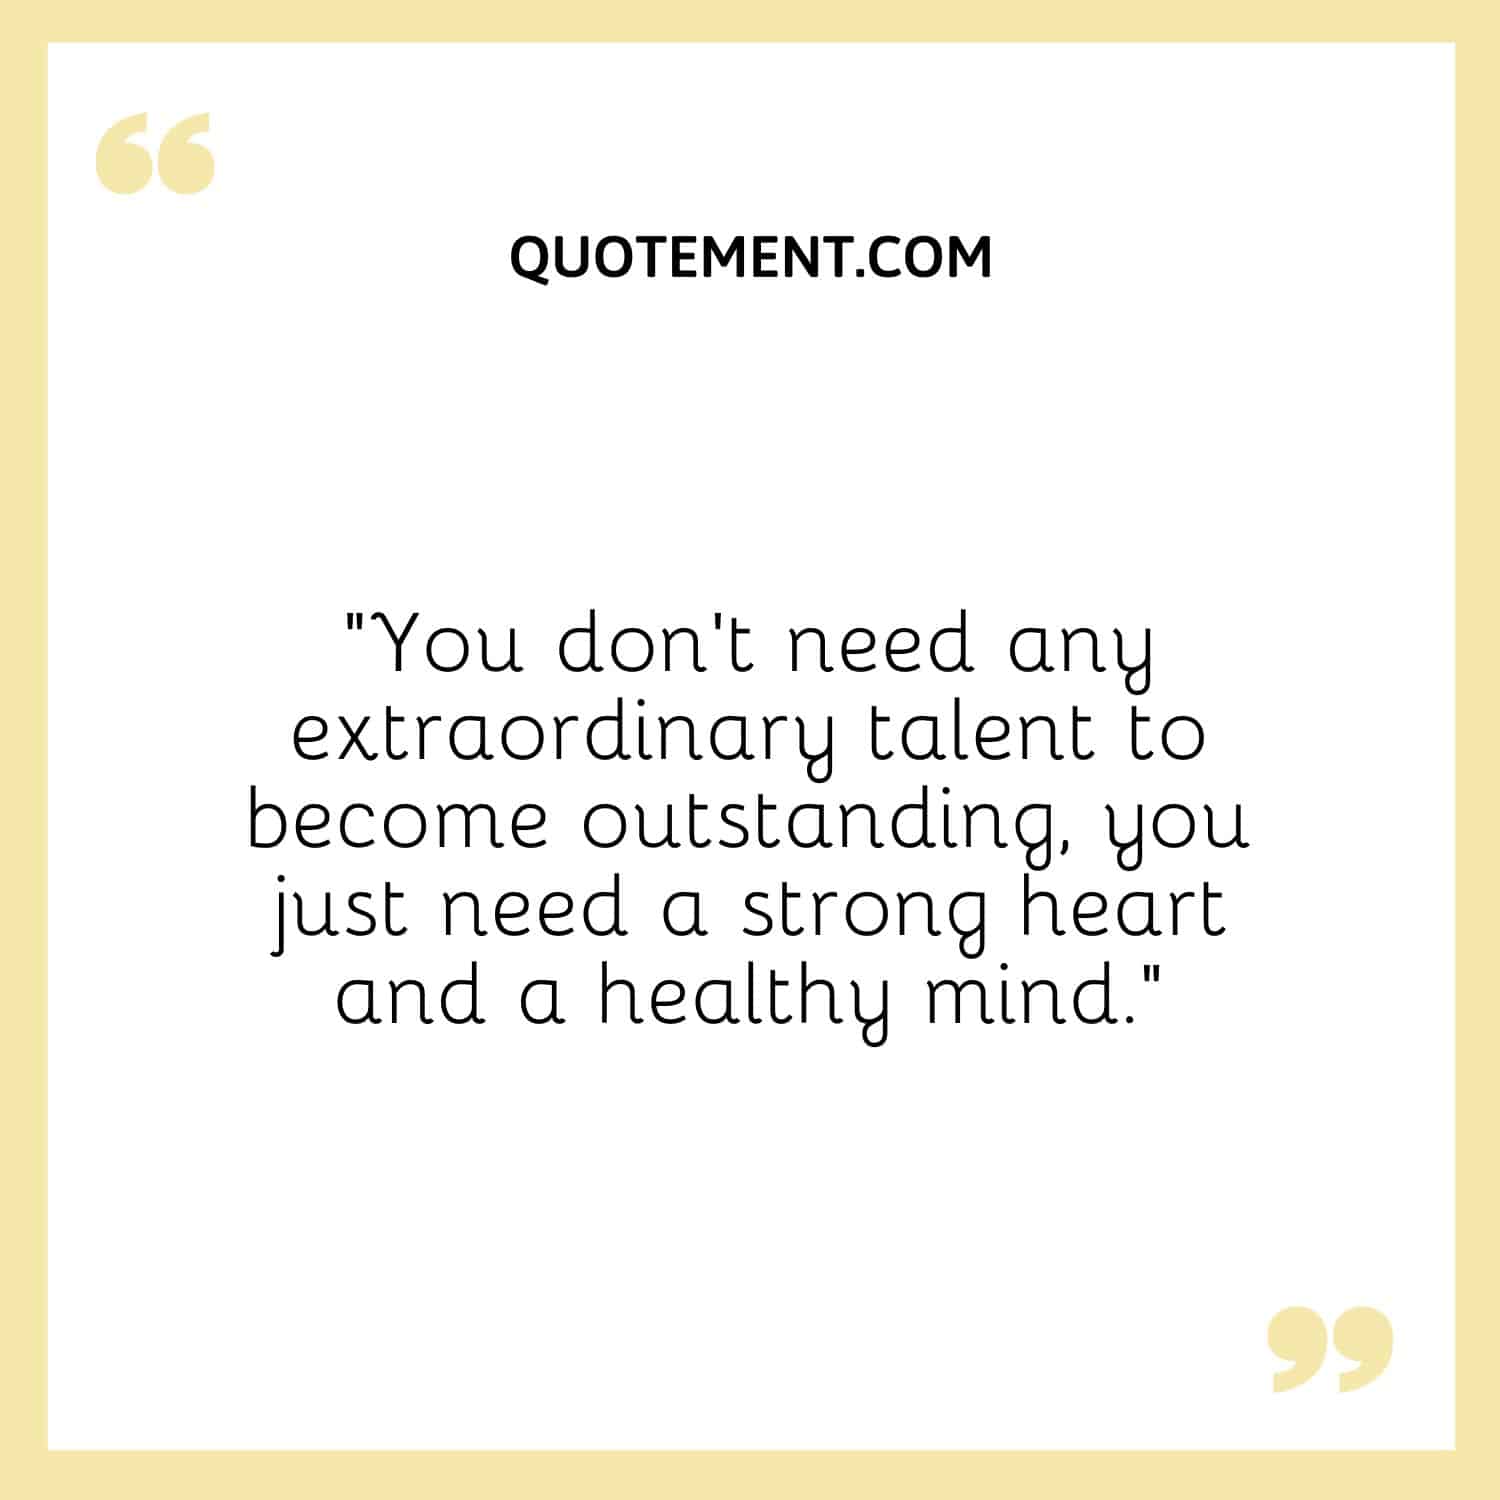 You don’t need any extraordinary talent to become outstanding, you just need a strong heart and a healthy mind